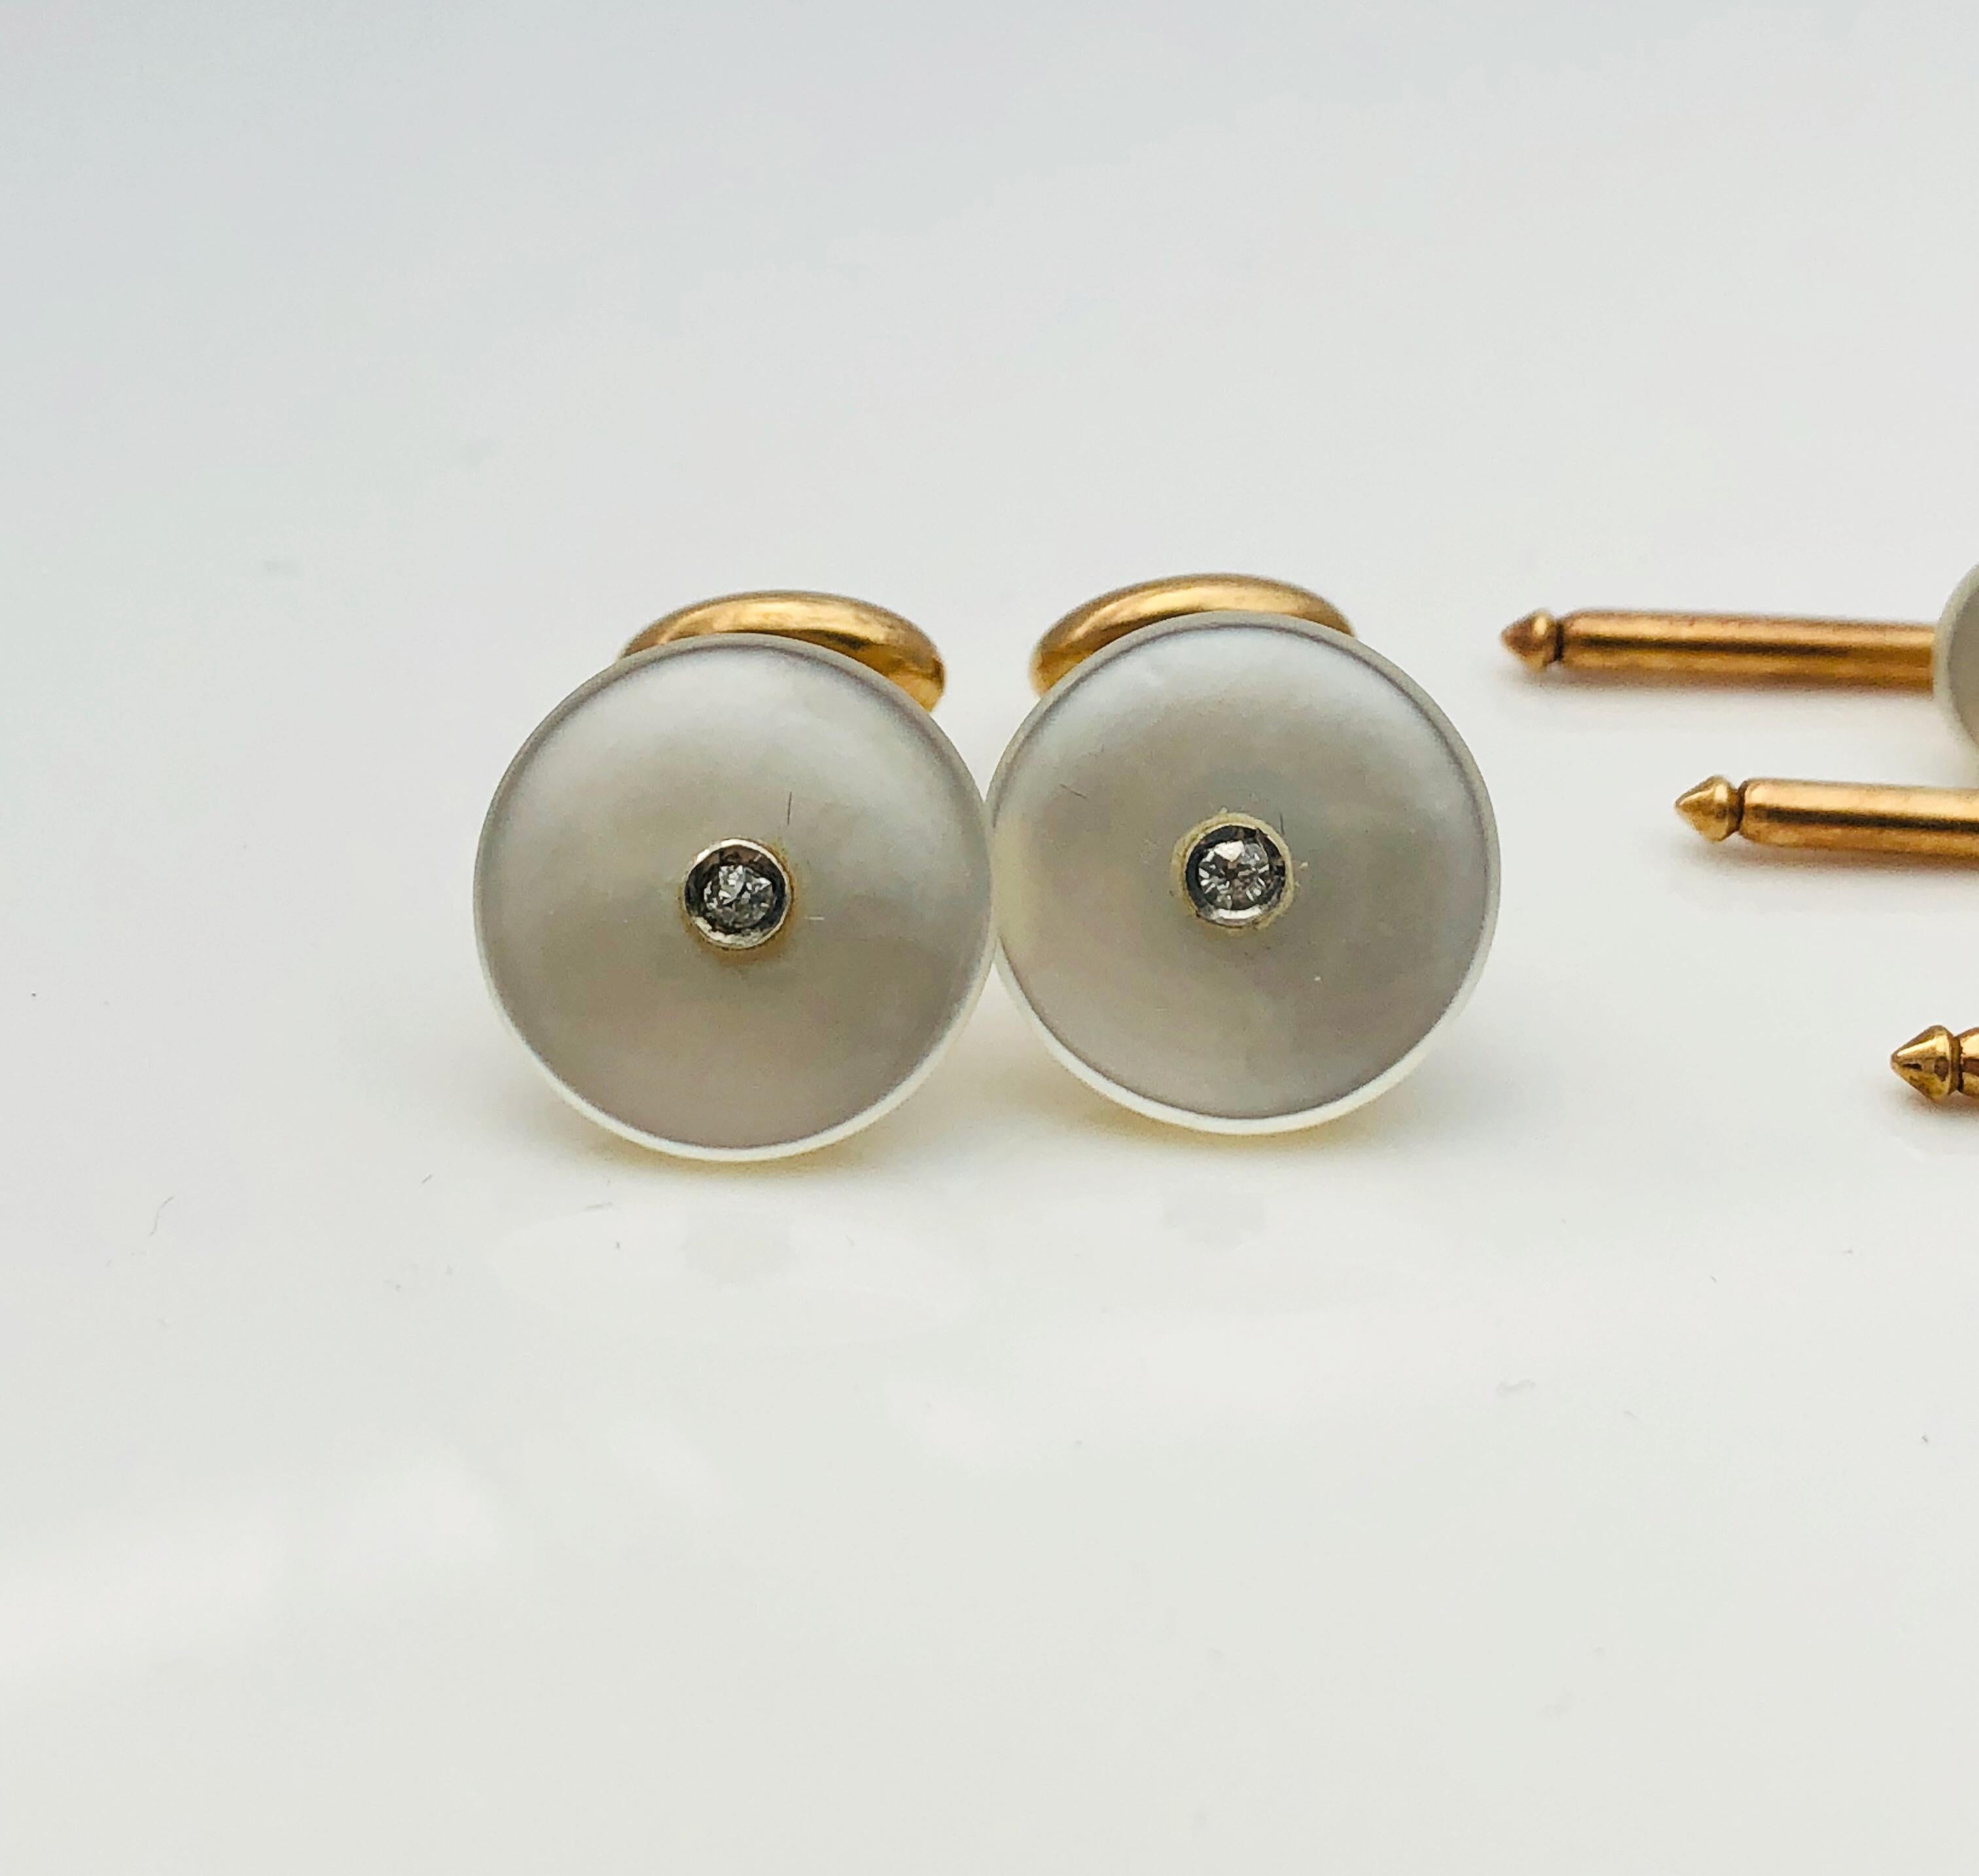 This is a lovely Art Deco Tuxedo Set! This estate set is made in 14K Yellow Gold and features cufflinks and studs that have a round mother of pearl base that is set with sparkling round diamond accent at the center. The cufflinks measure 1/2 inch in